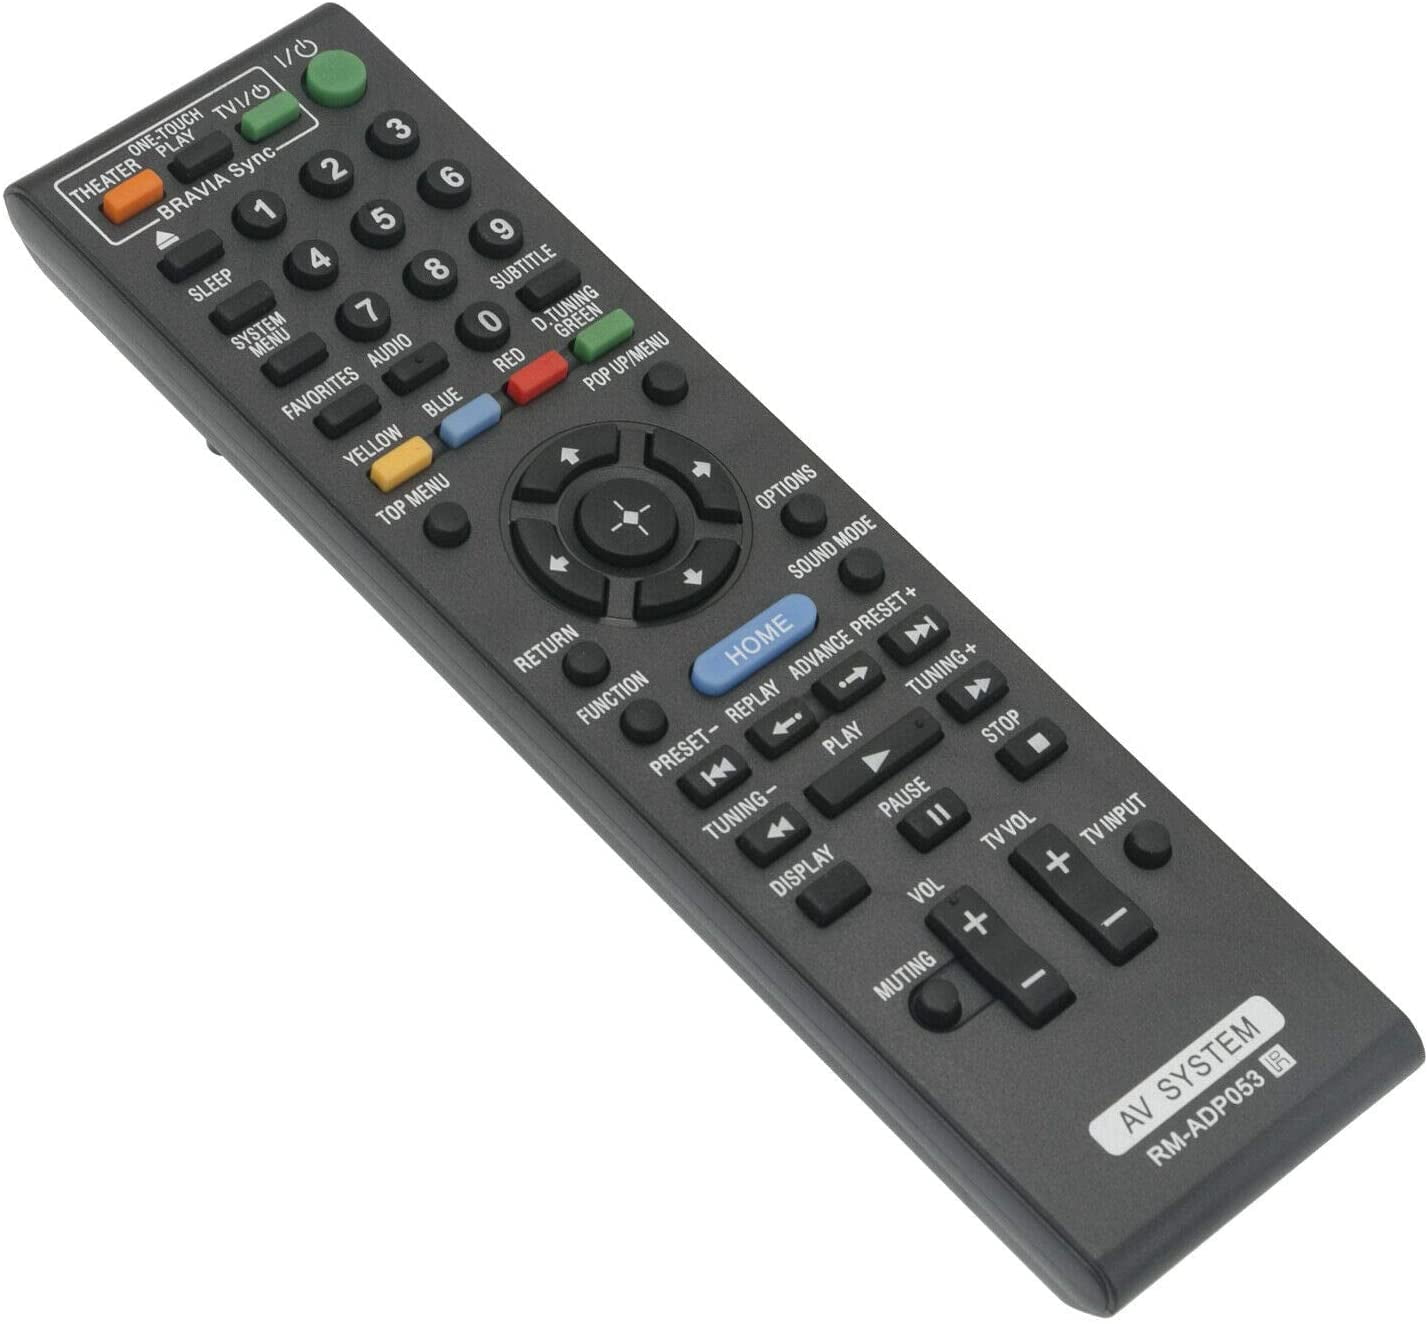 New RM-ADP053 Replace Remote Control fit for Sony Blu-ray Disc DVD Player Home Theater System 1-487-647-11 BDV-E370 BDV-E470 BDV-E570 BDV-E580 BDV-E770W BDV-E870 BDV-E880 BDVF500 BDV-F500 BDV-F7